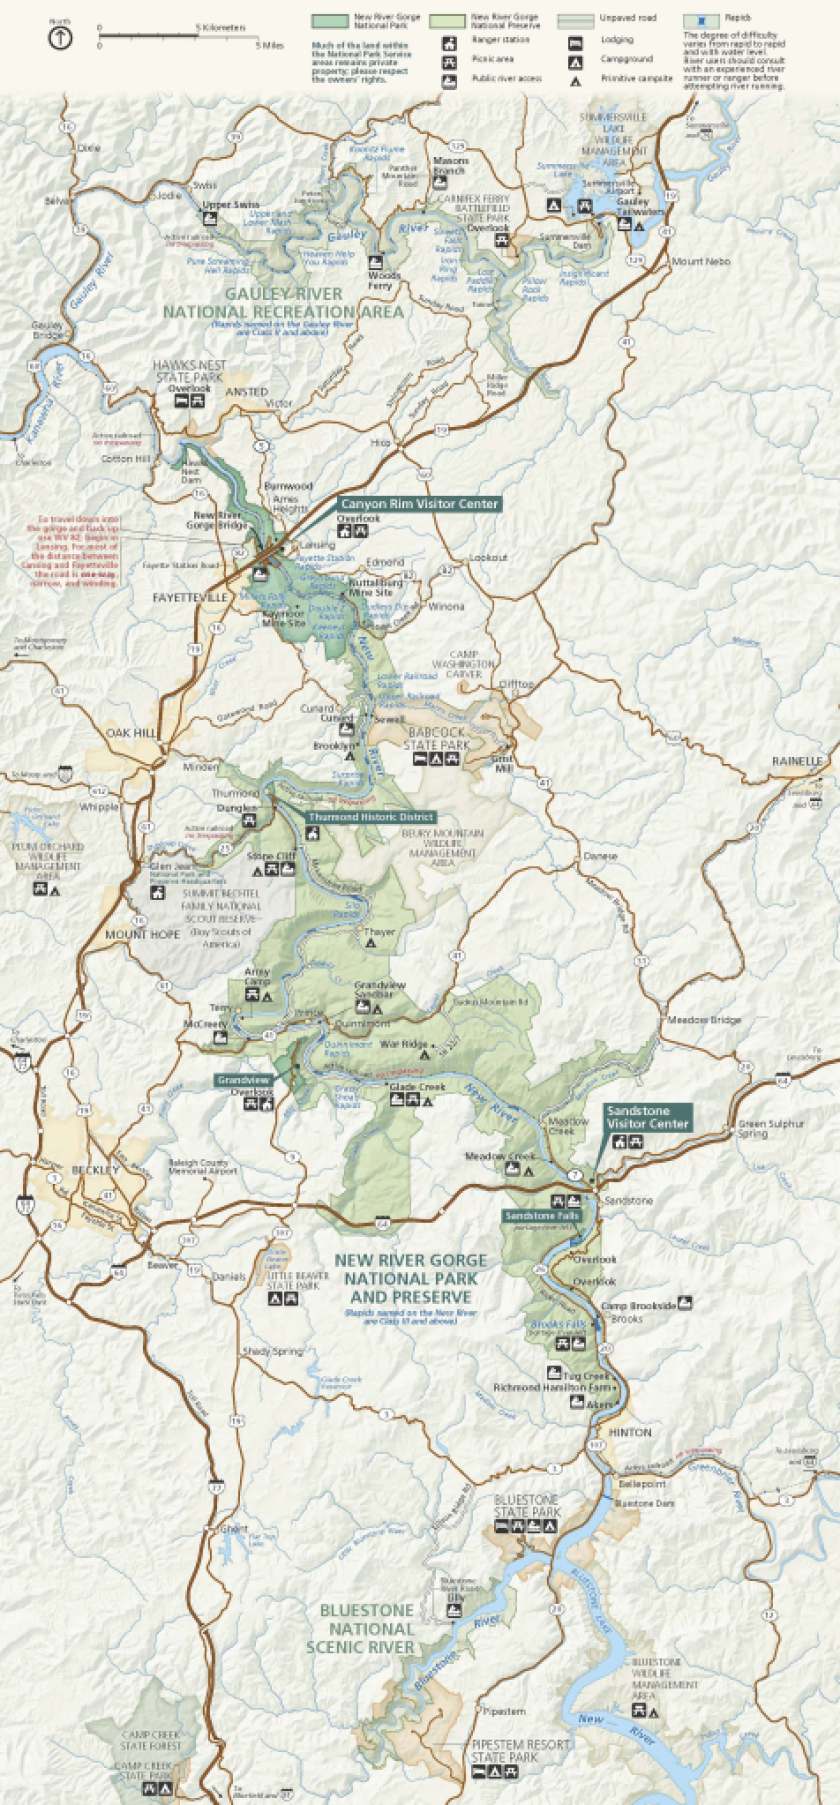 A map of New River Gorge National Park